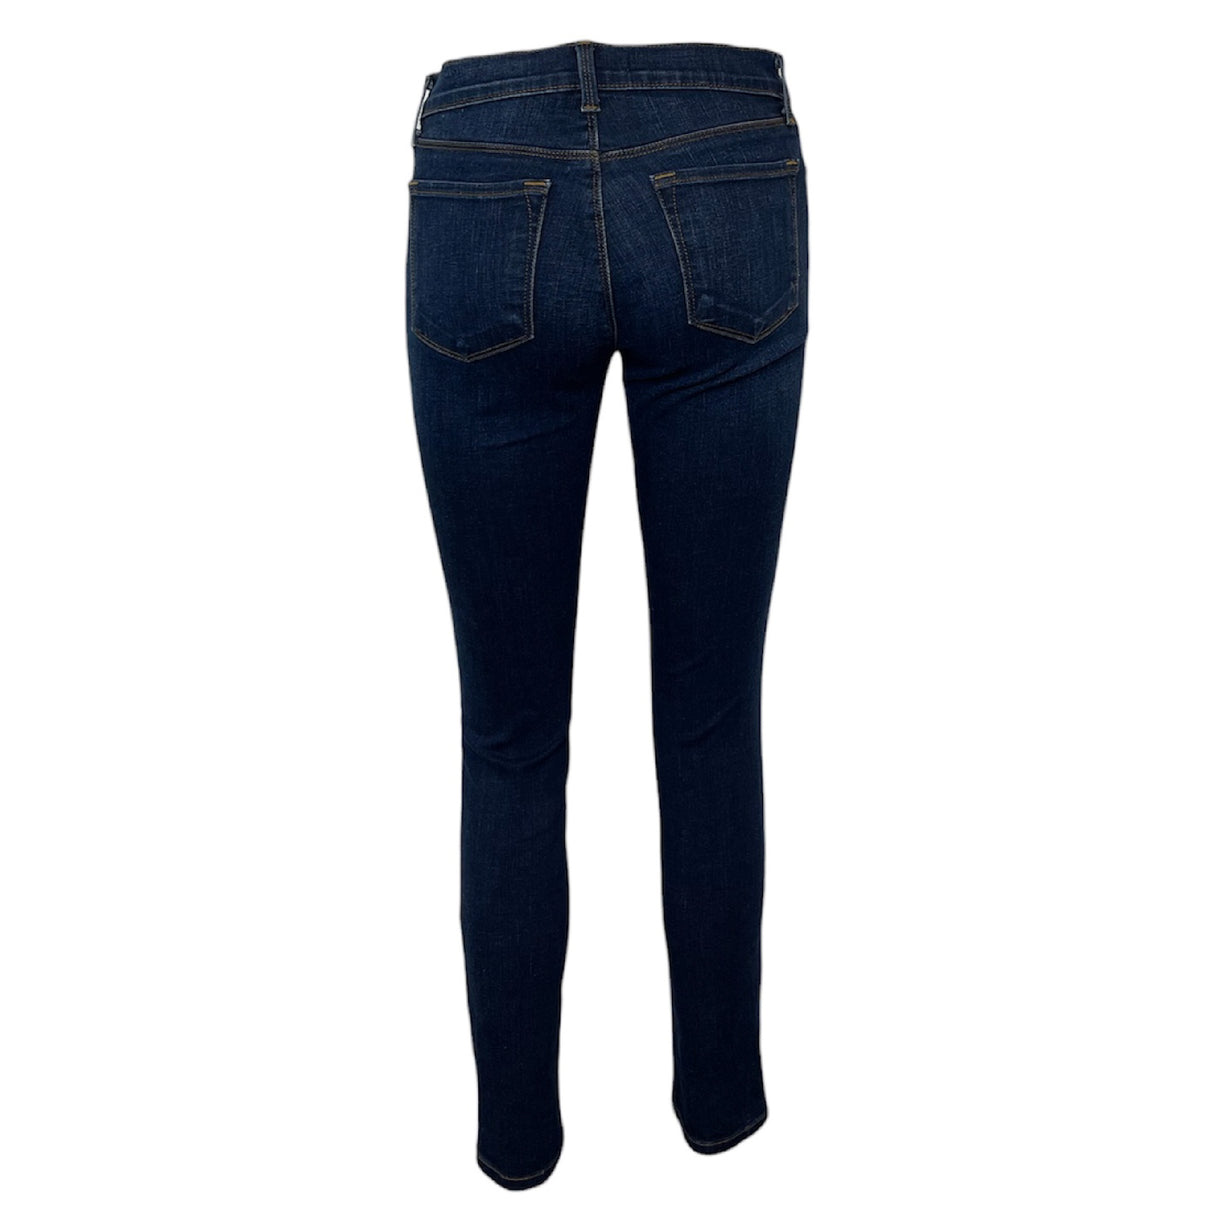 A Second Chance - J Brand 26 Denim Blue Women - Delivery All Over Lebanon